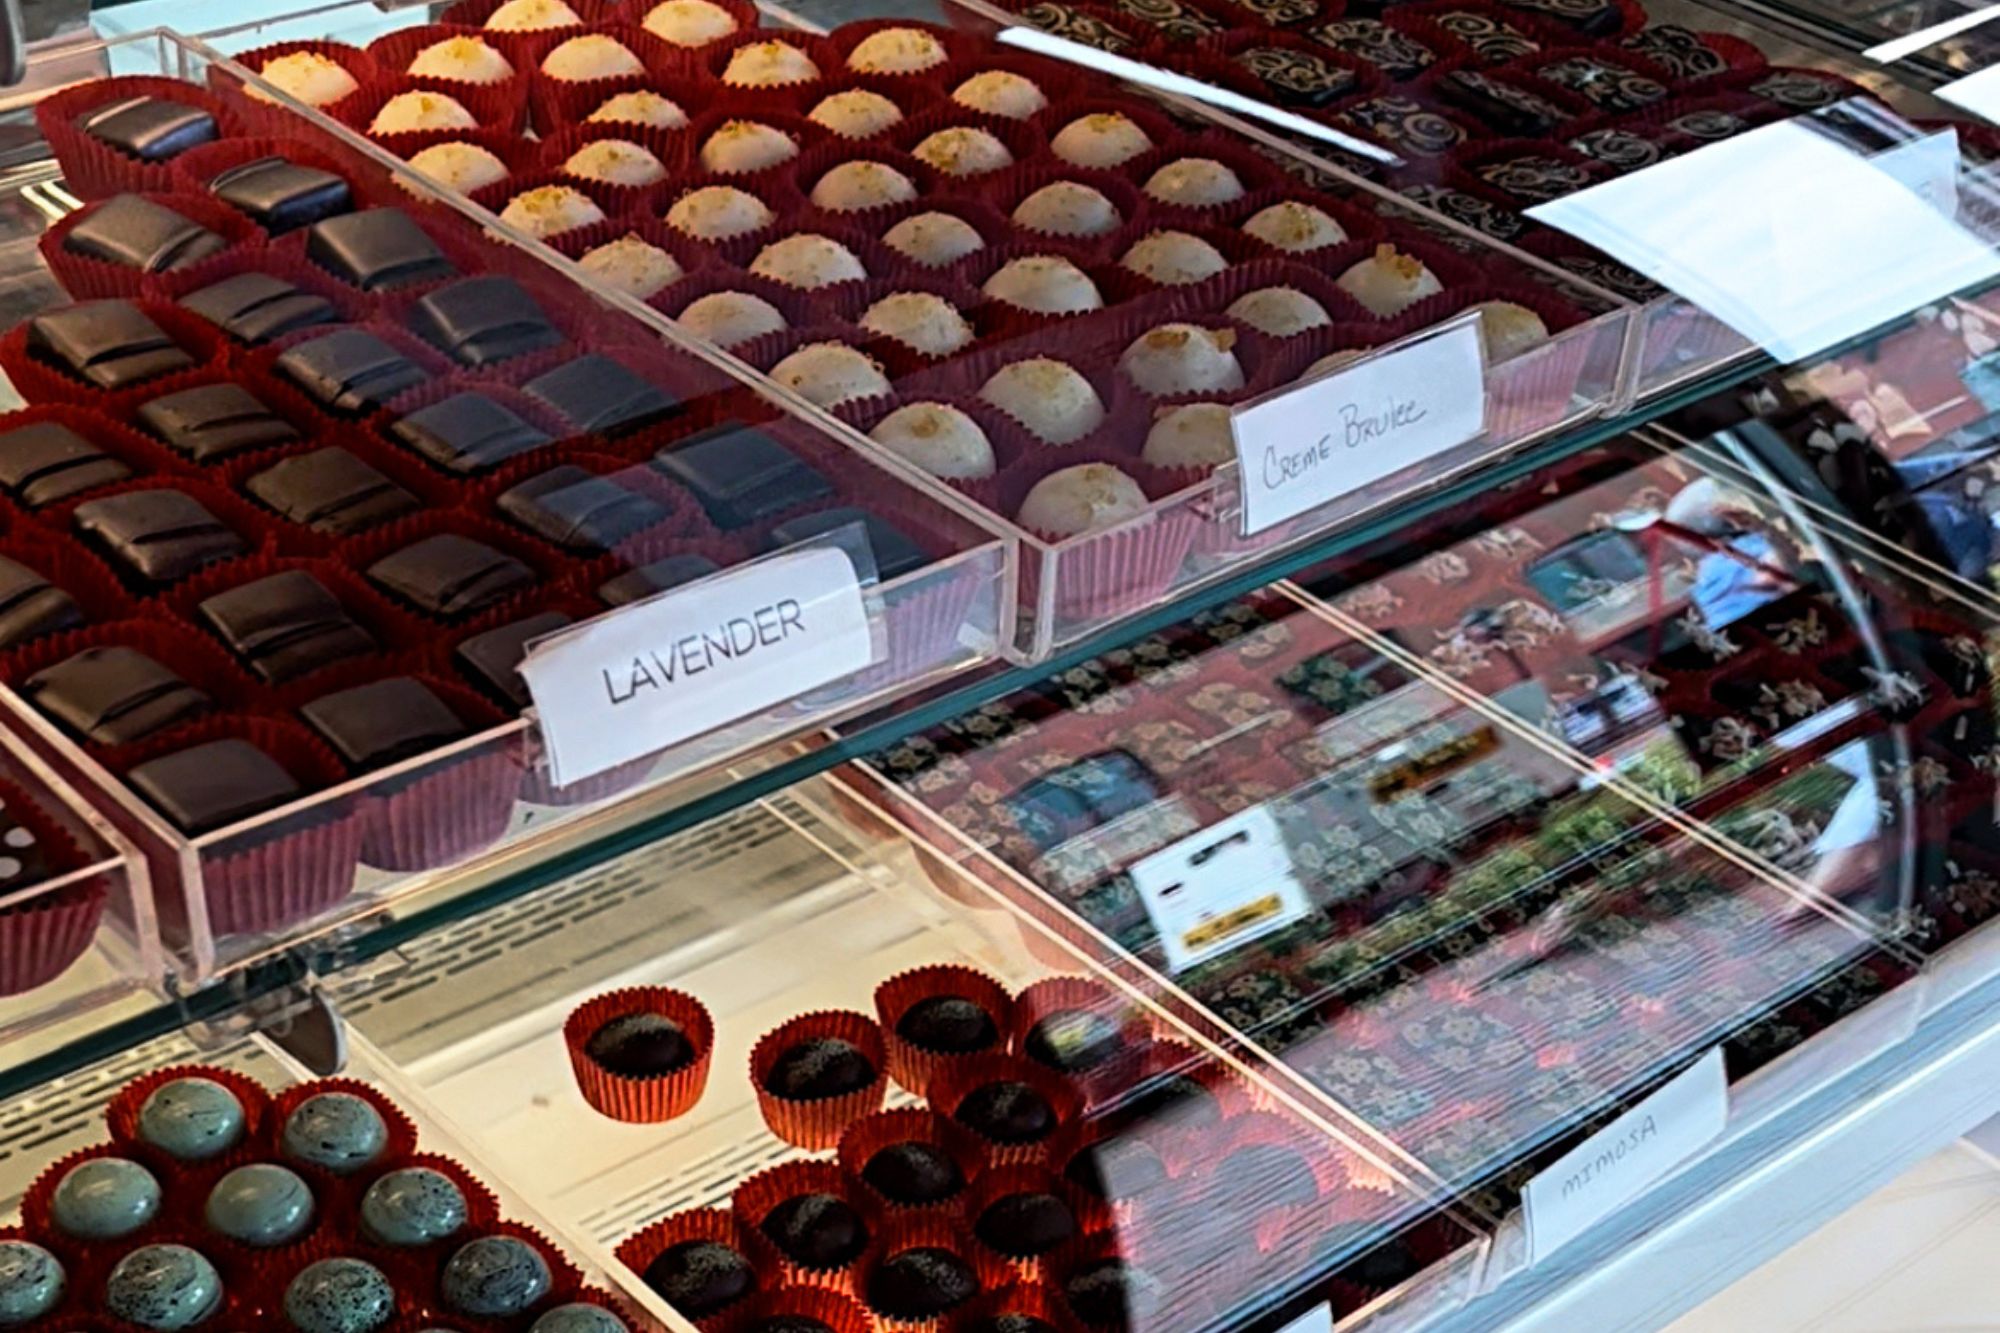 rows of chocolate bonbons behind glass